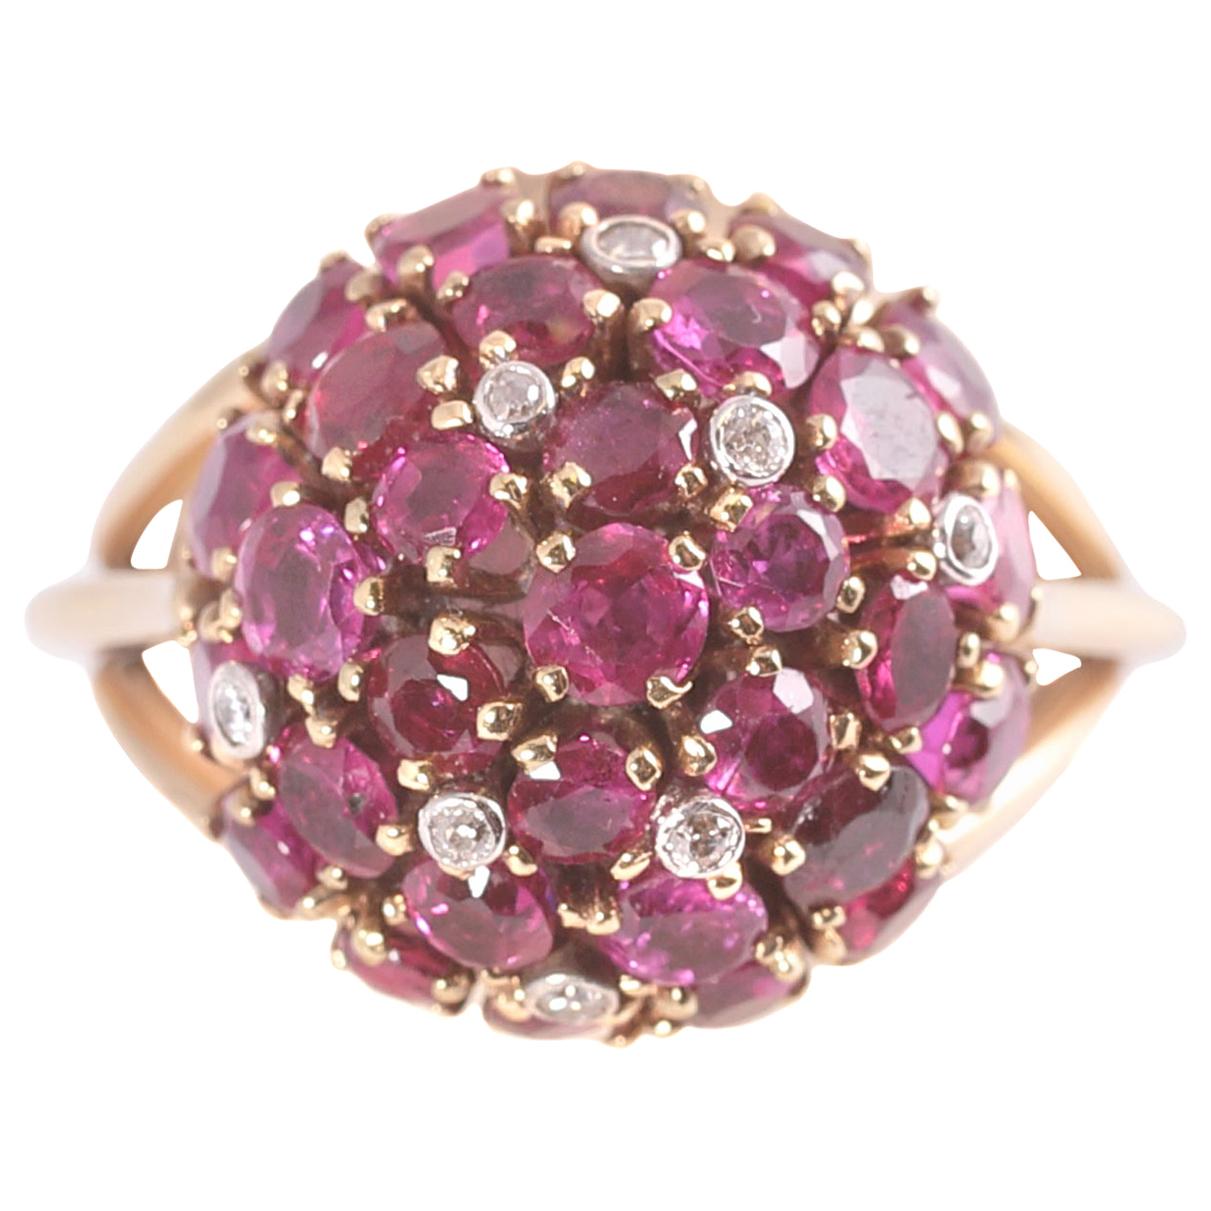 6.5 Carat Ruby and Diamond Ring